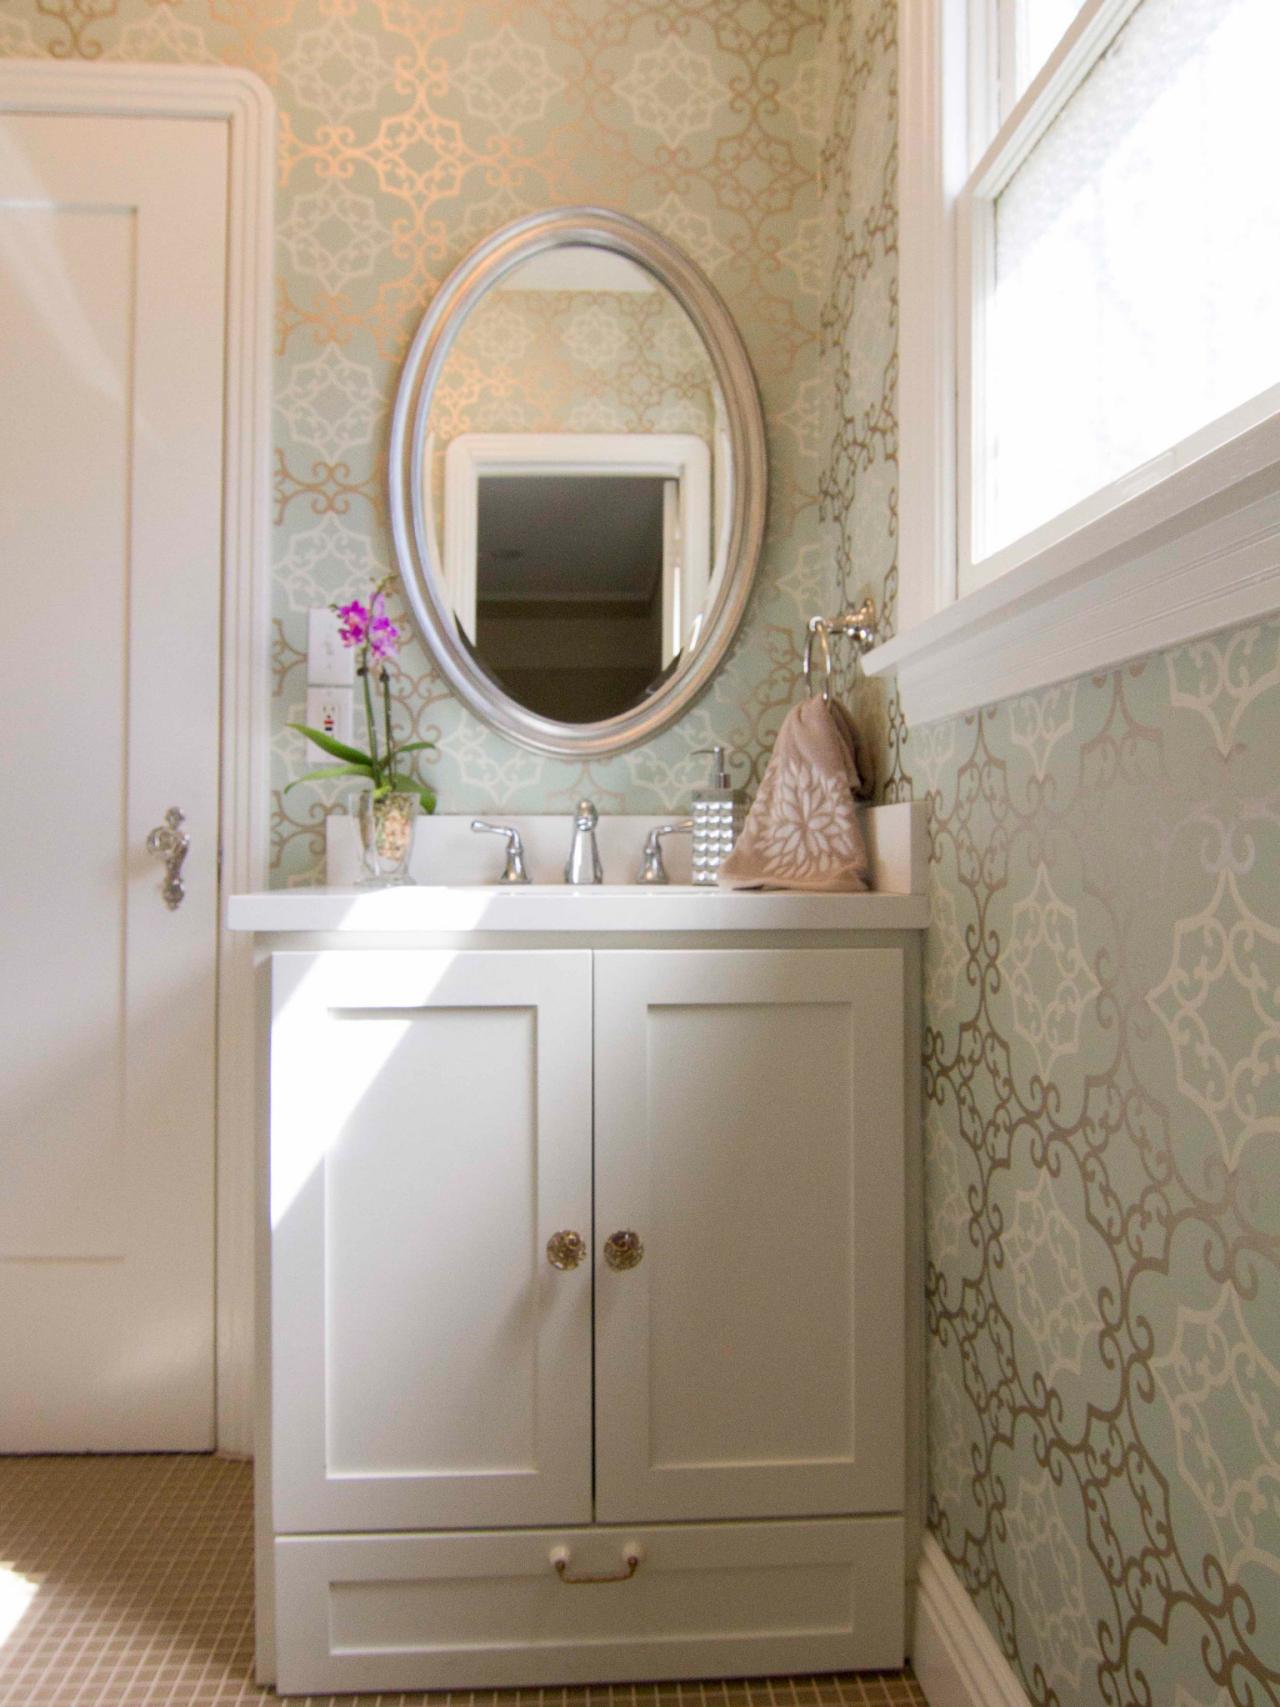 Traditional Bathroom With Sophisticated Patterned ...